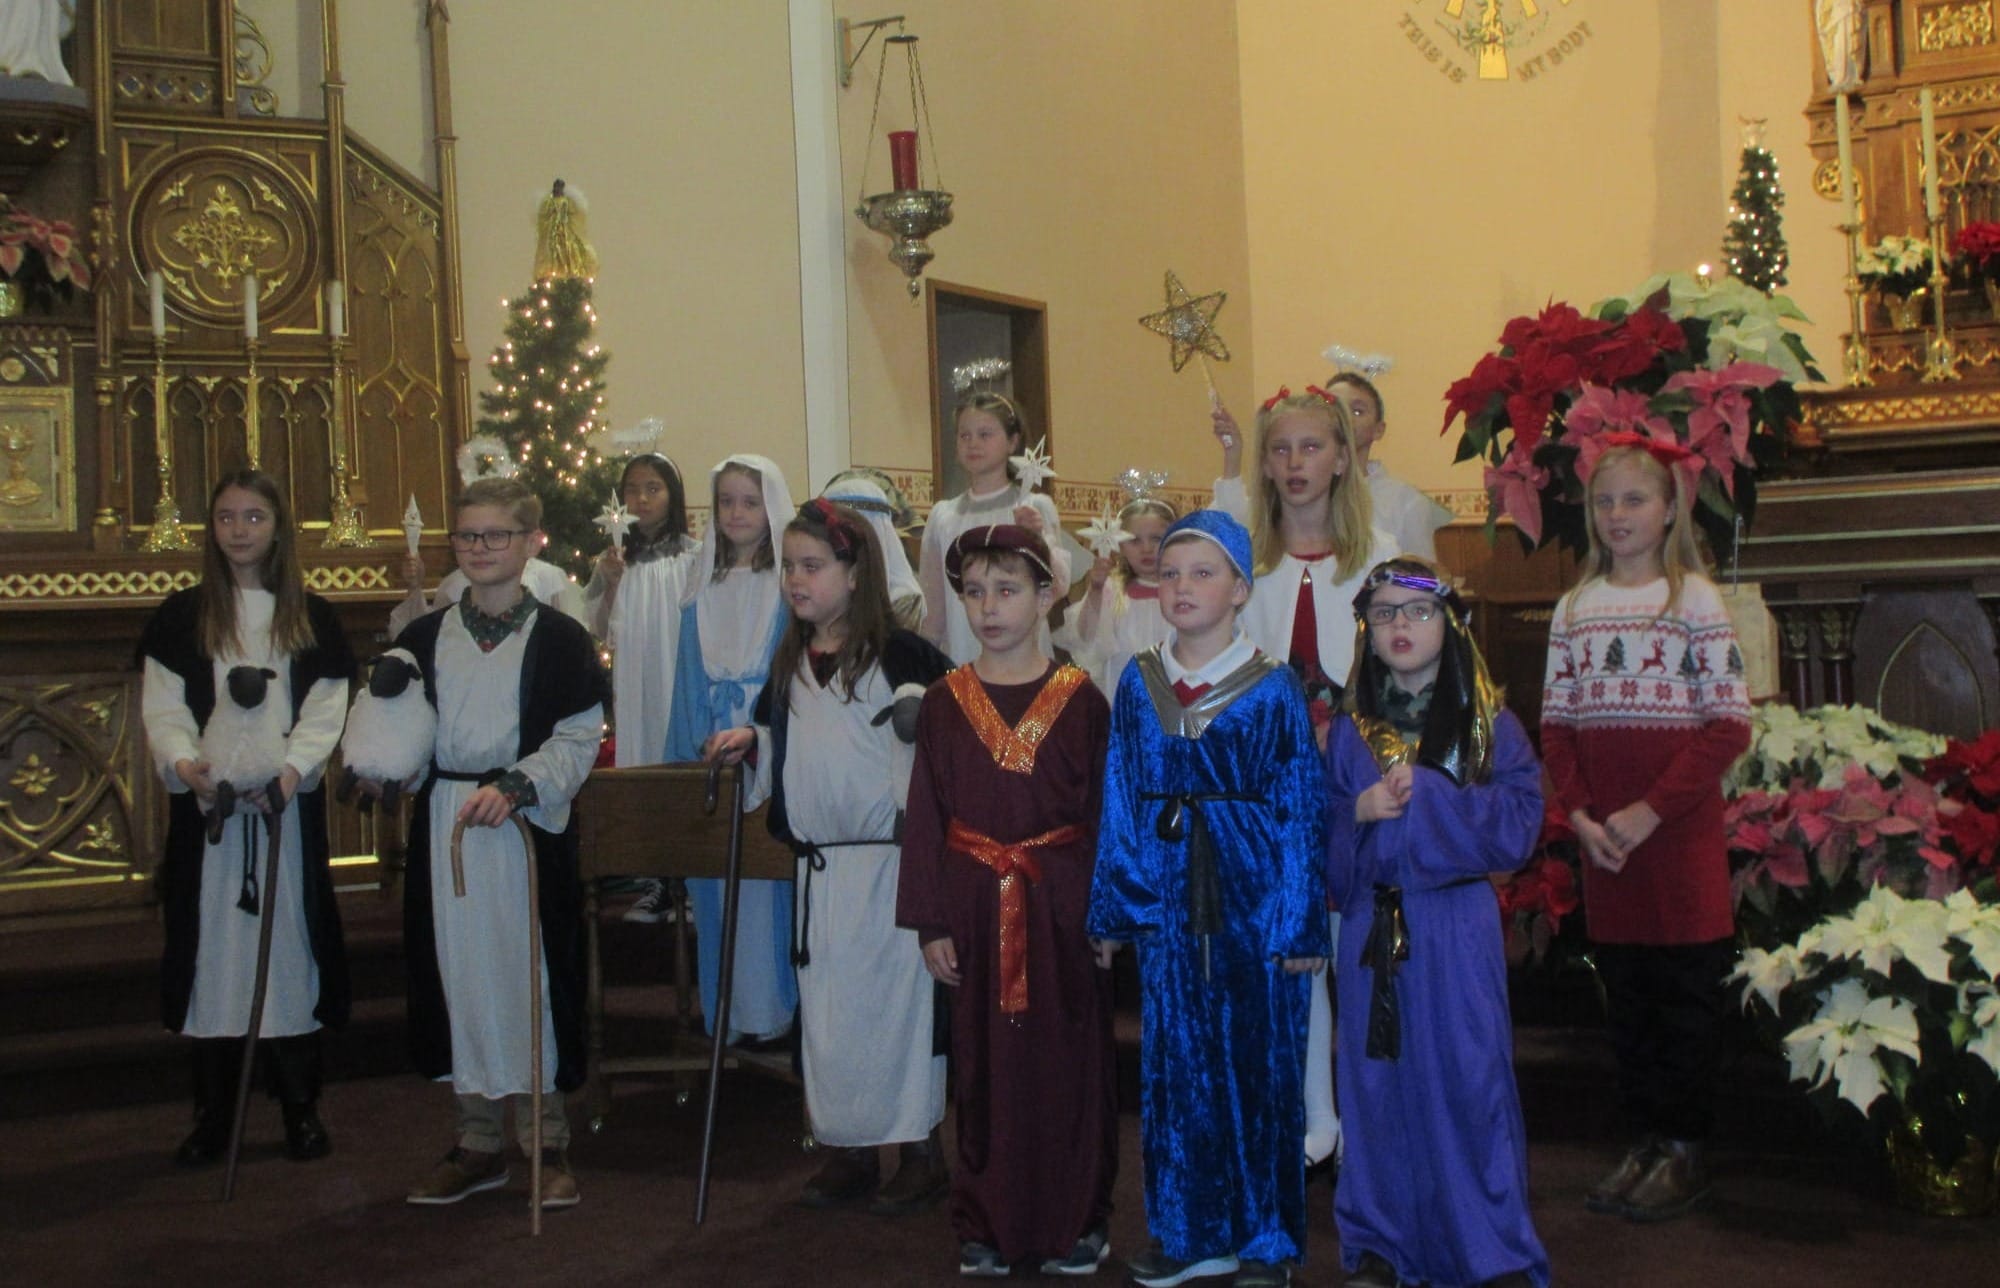                      Christmas Pageant                             
                     